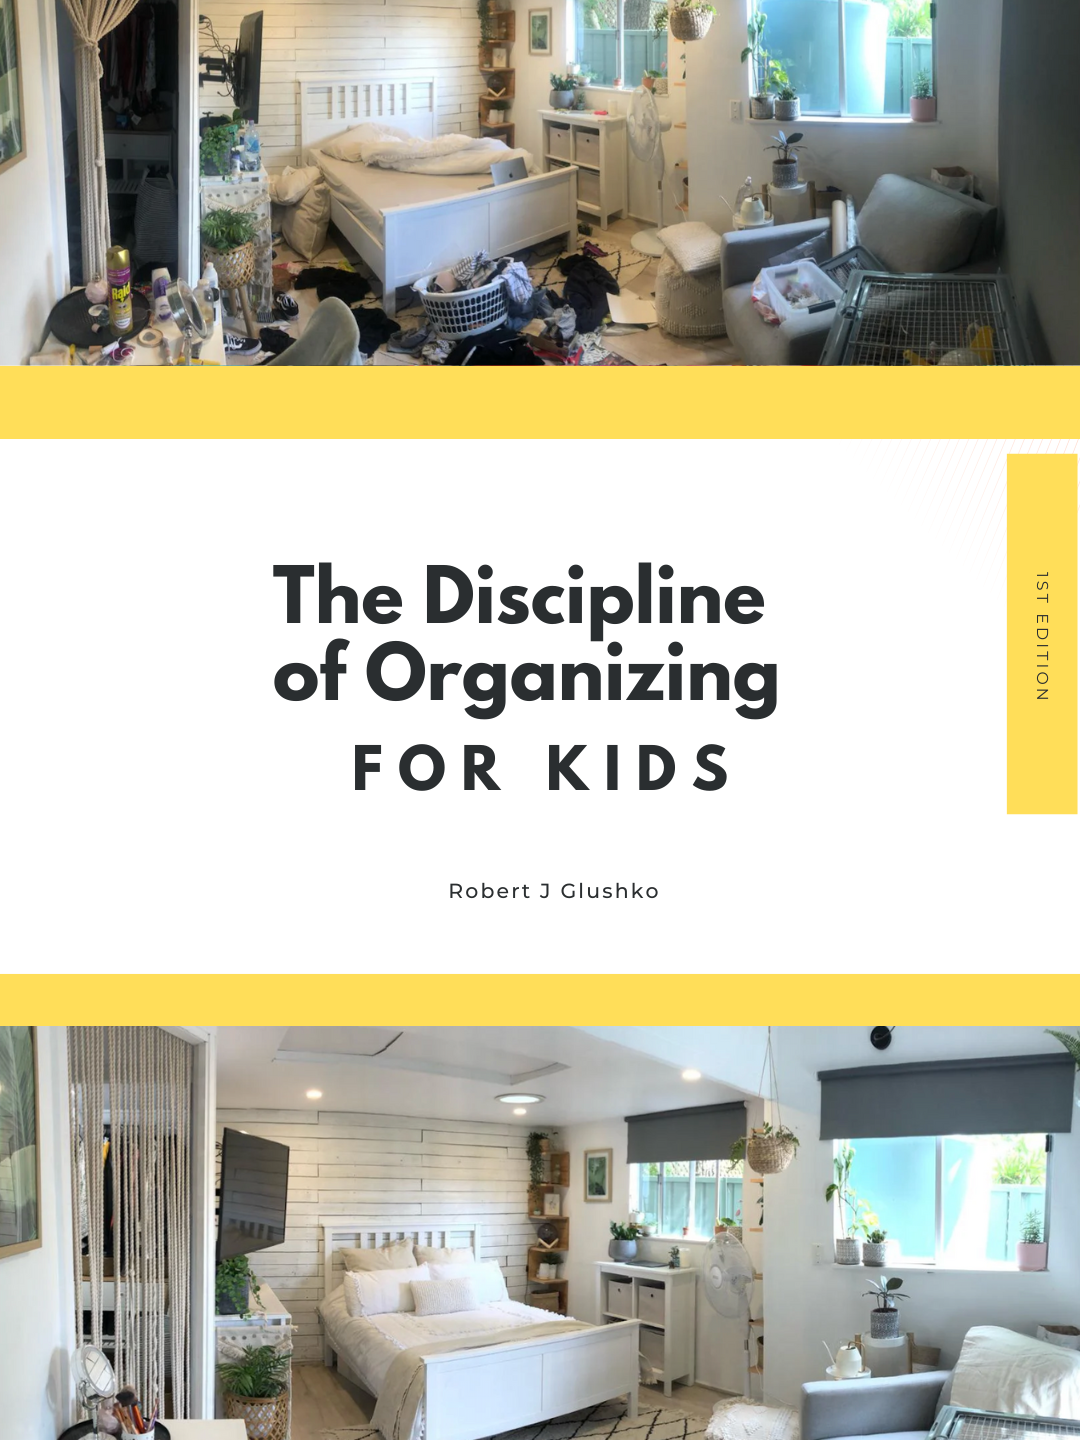 Cover image for "The Discipline of Organizing" for Kids